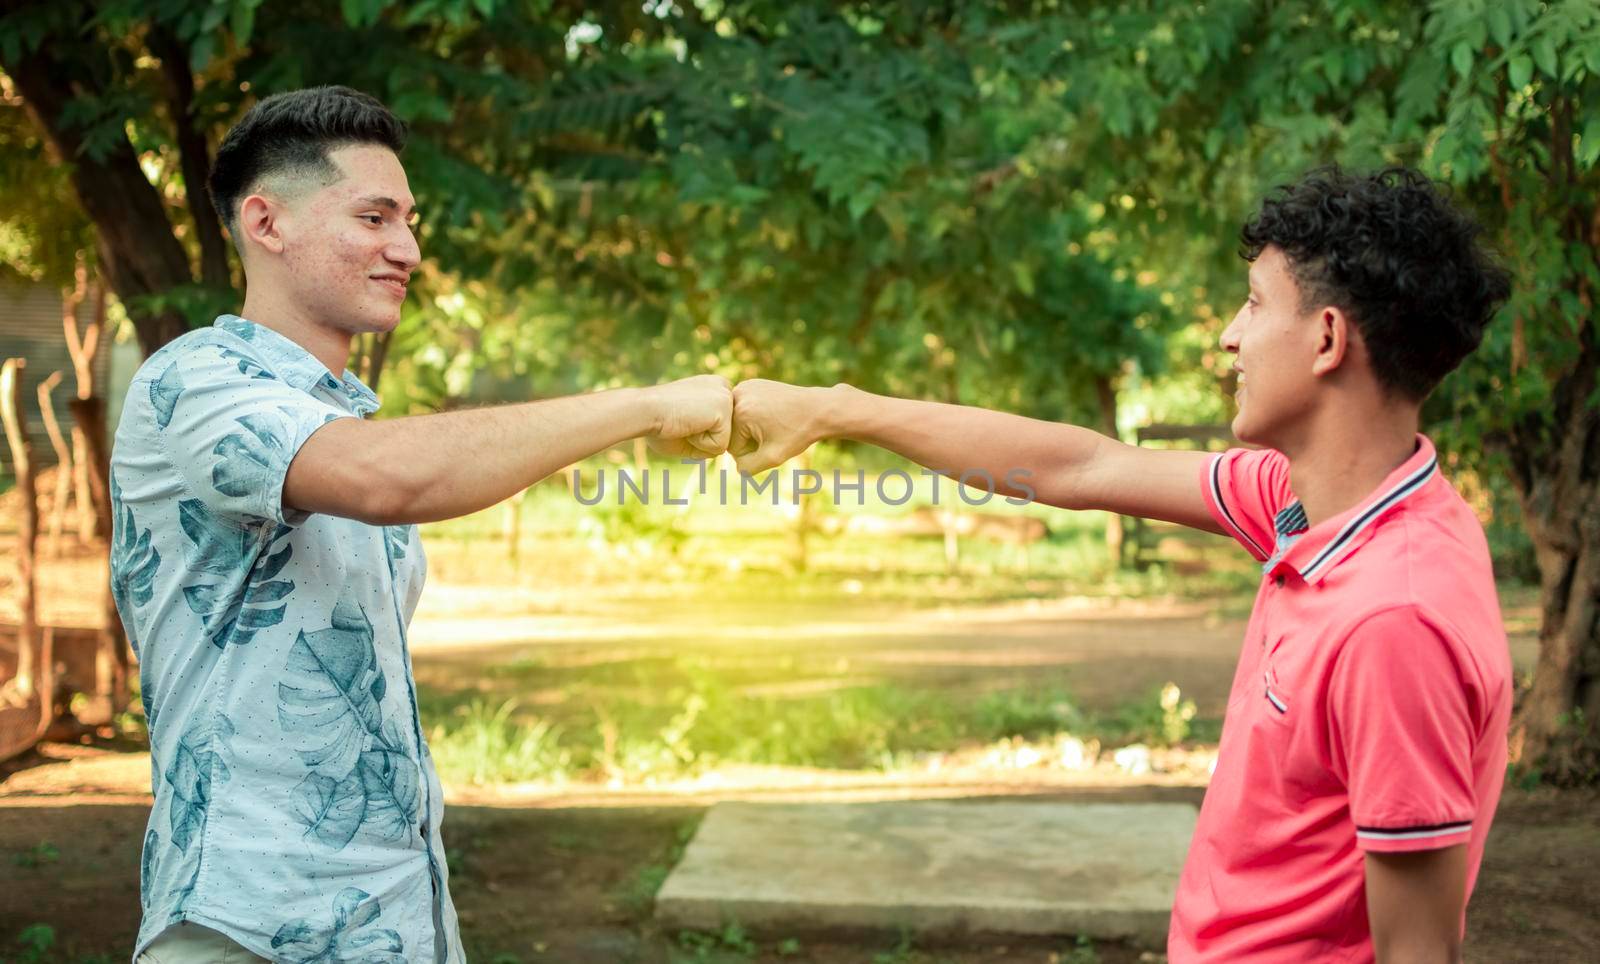 Two young men clashing their fists, image of two young men bumping their fists in a friendly way, close up of two fists bumping in a friendly way by isaiphoto